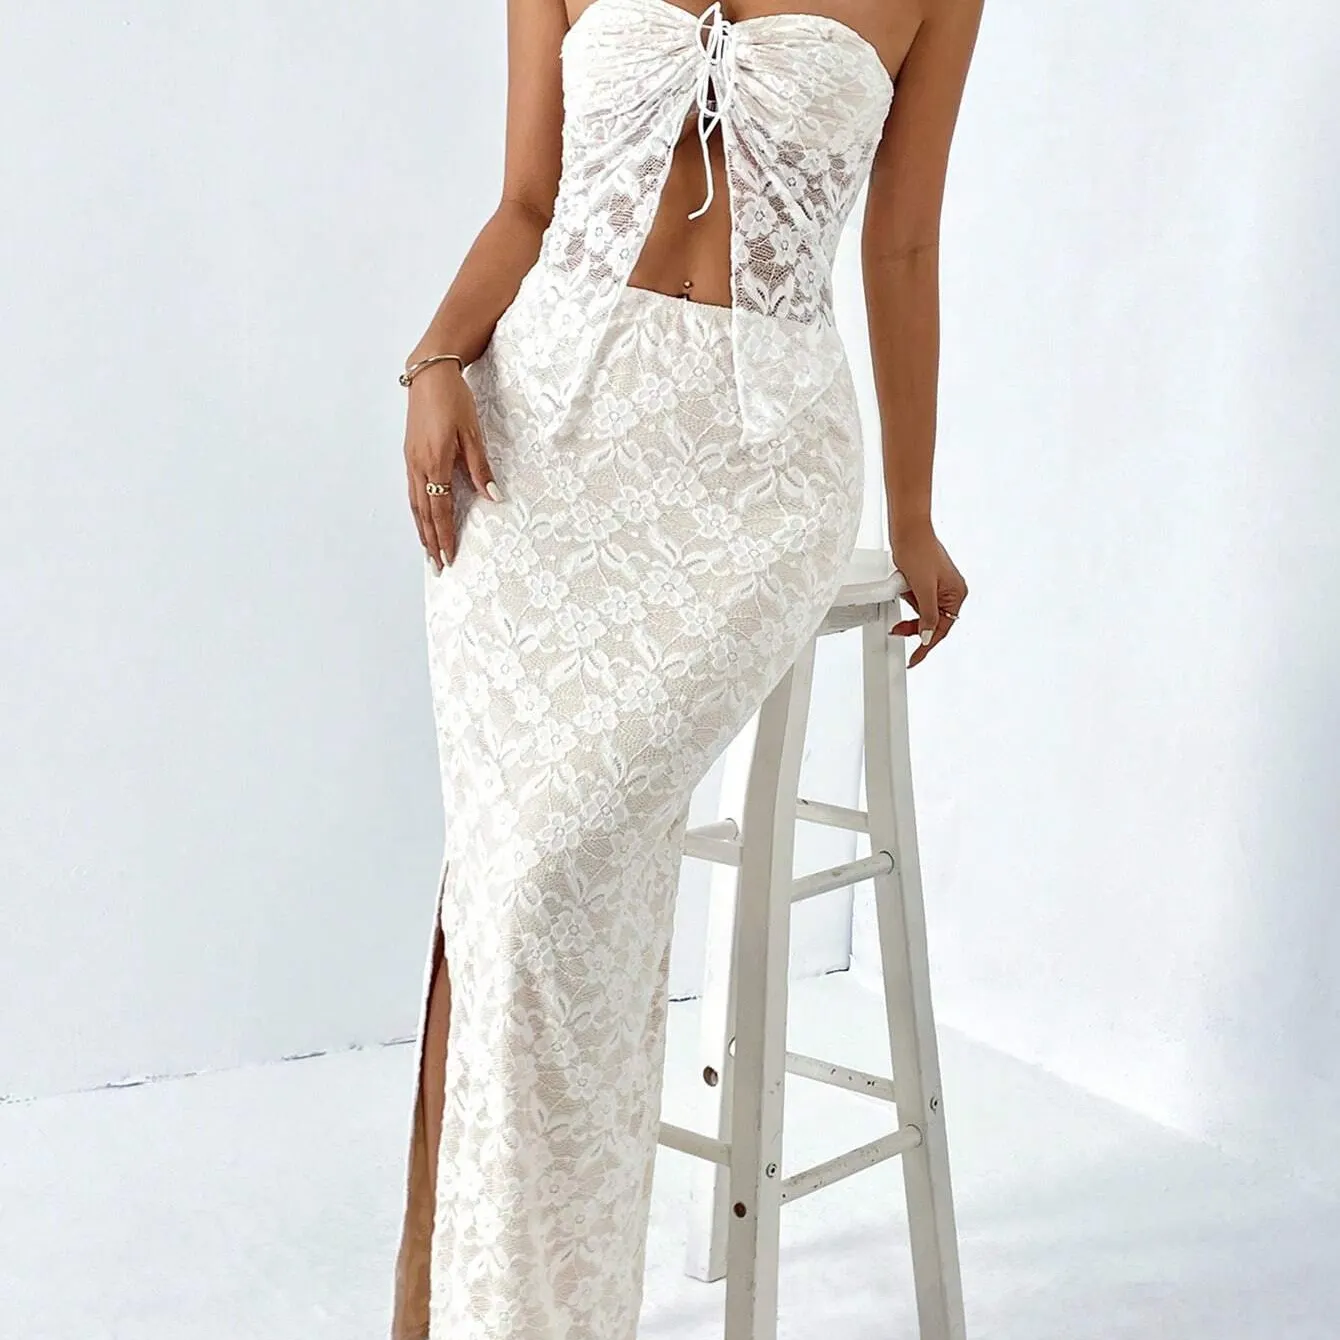 Custom Women Dress Sexy Summer 2 Pieces Halter V-Neck Lace Bodycon Top And Lace Slit Skirt